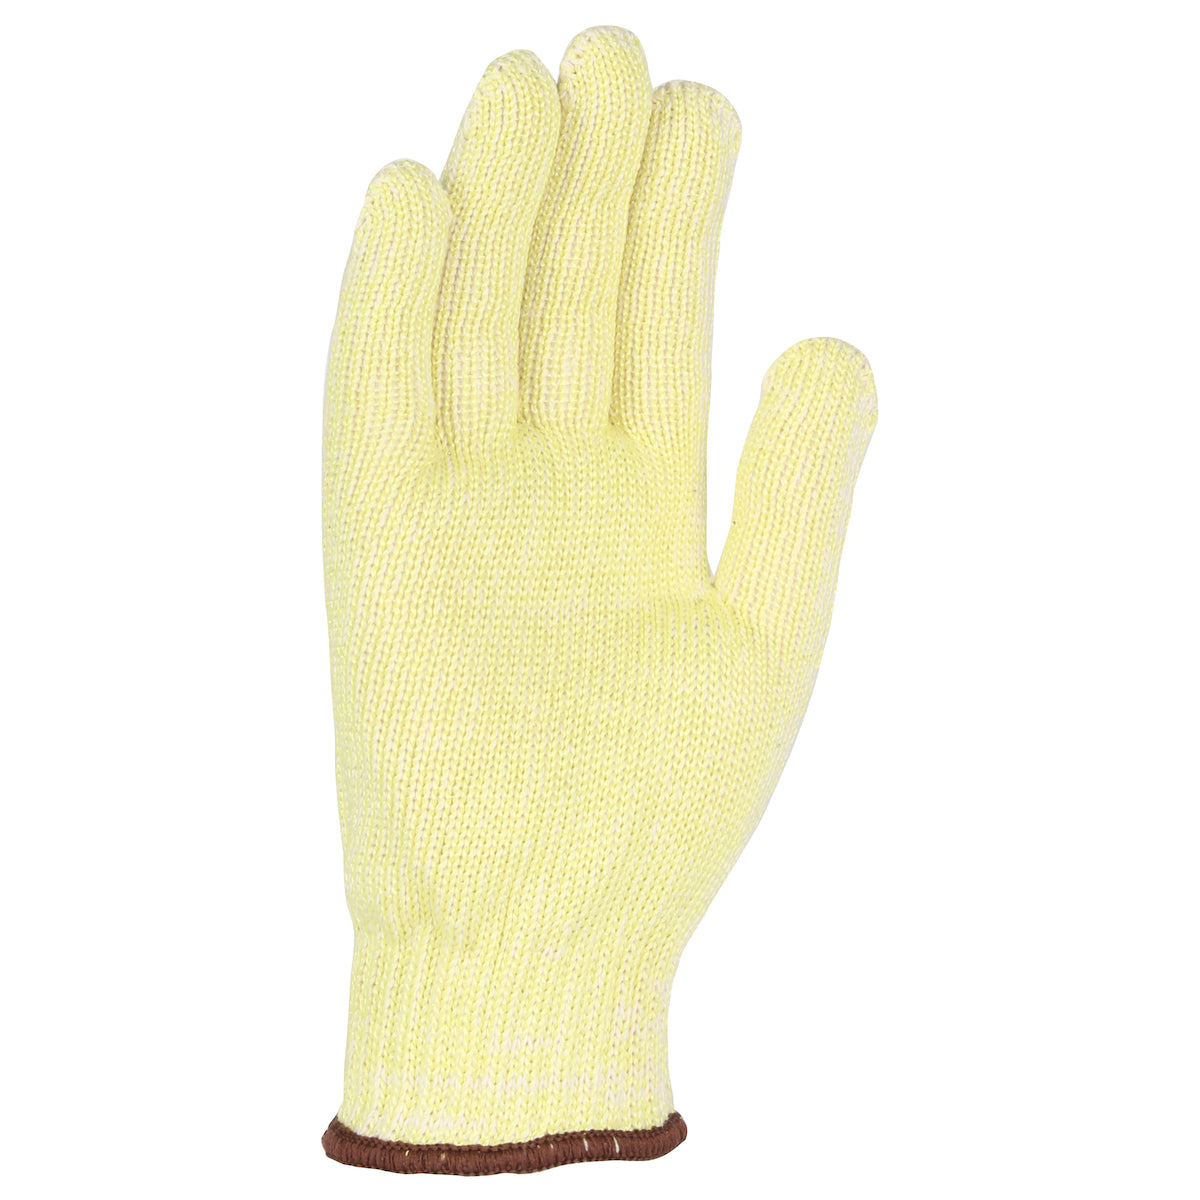 WPP MATW55PL-M Seamless Knit Aramid / Cotton Blended Glove - Heavy Weight